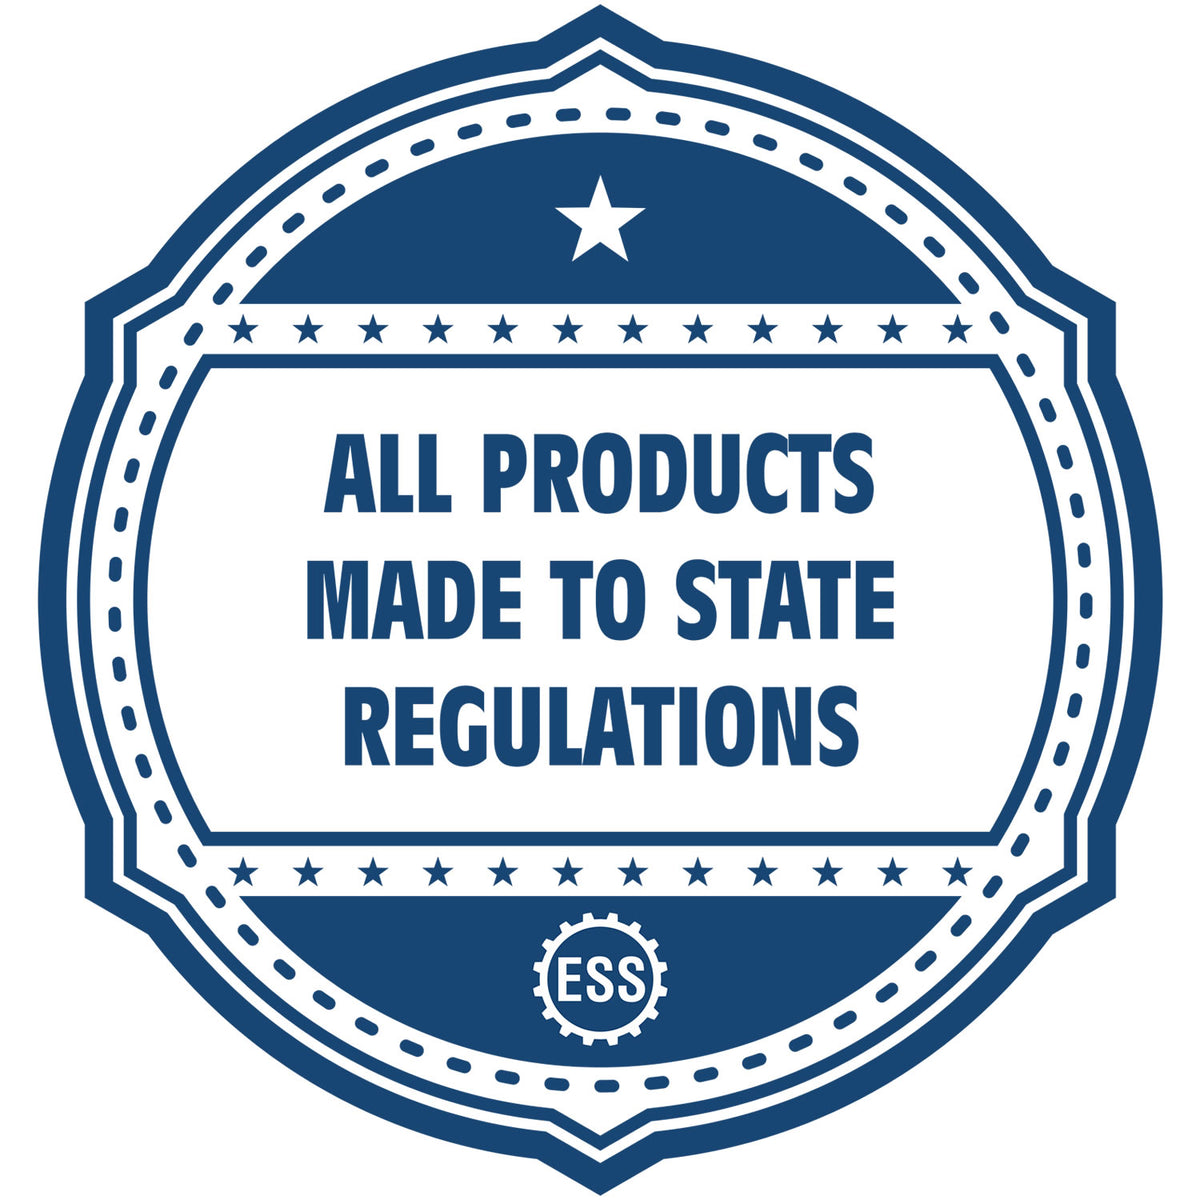 An icon or badge element for the Premium MaxLight Pre-Inked New Hampshire Engineering Stamp showing that this product is made in compliance with state regulations.